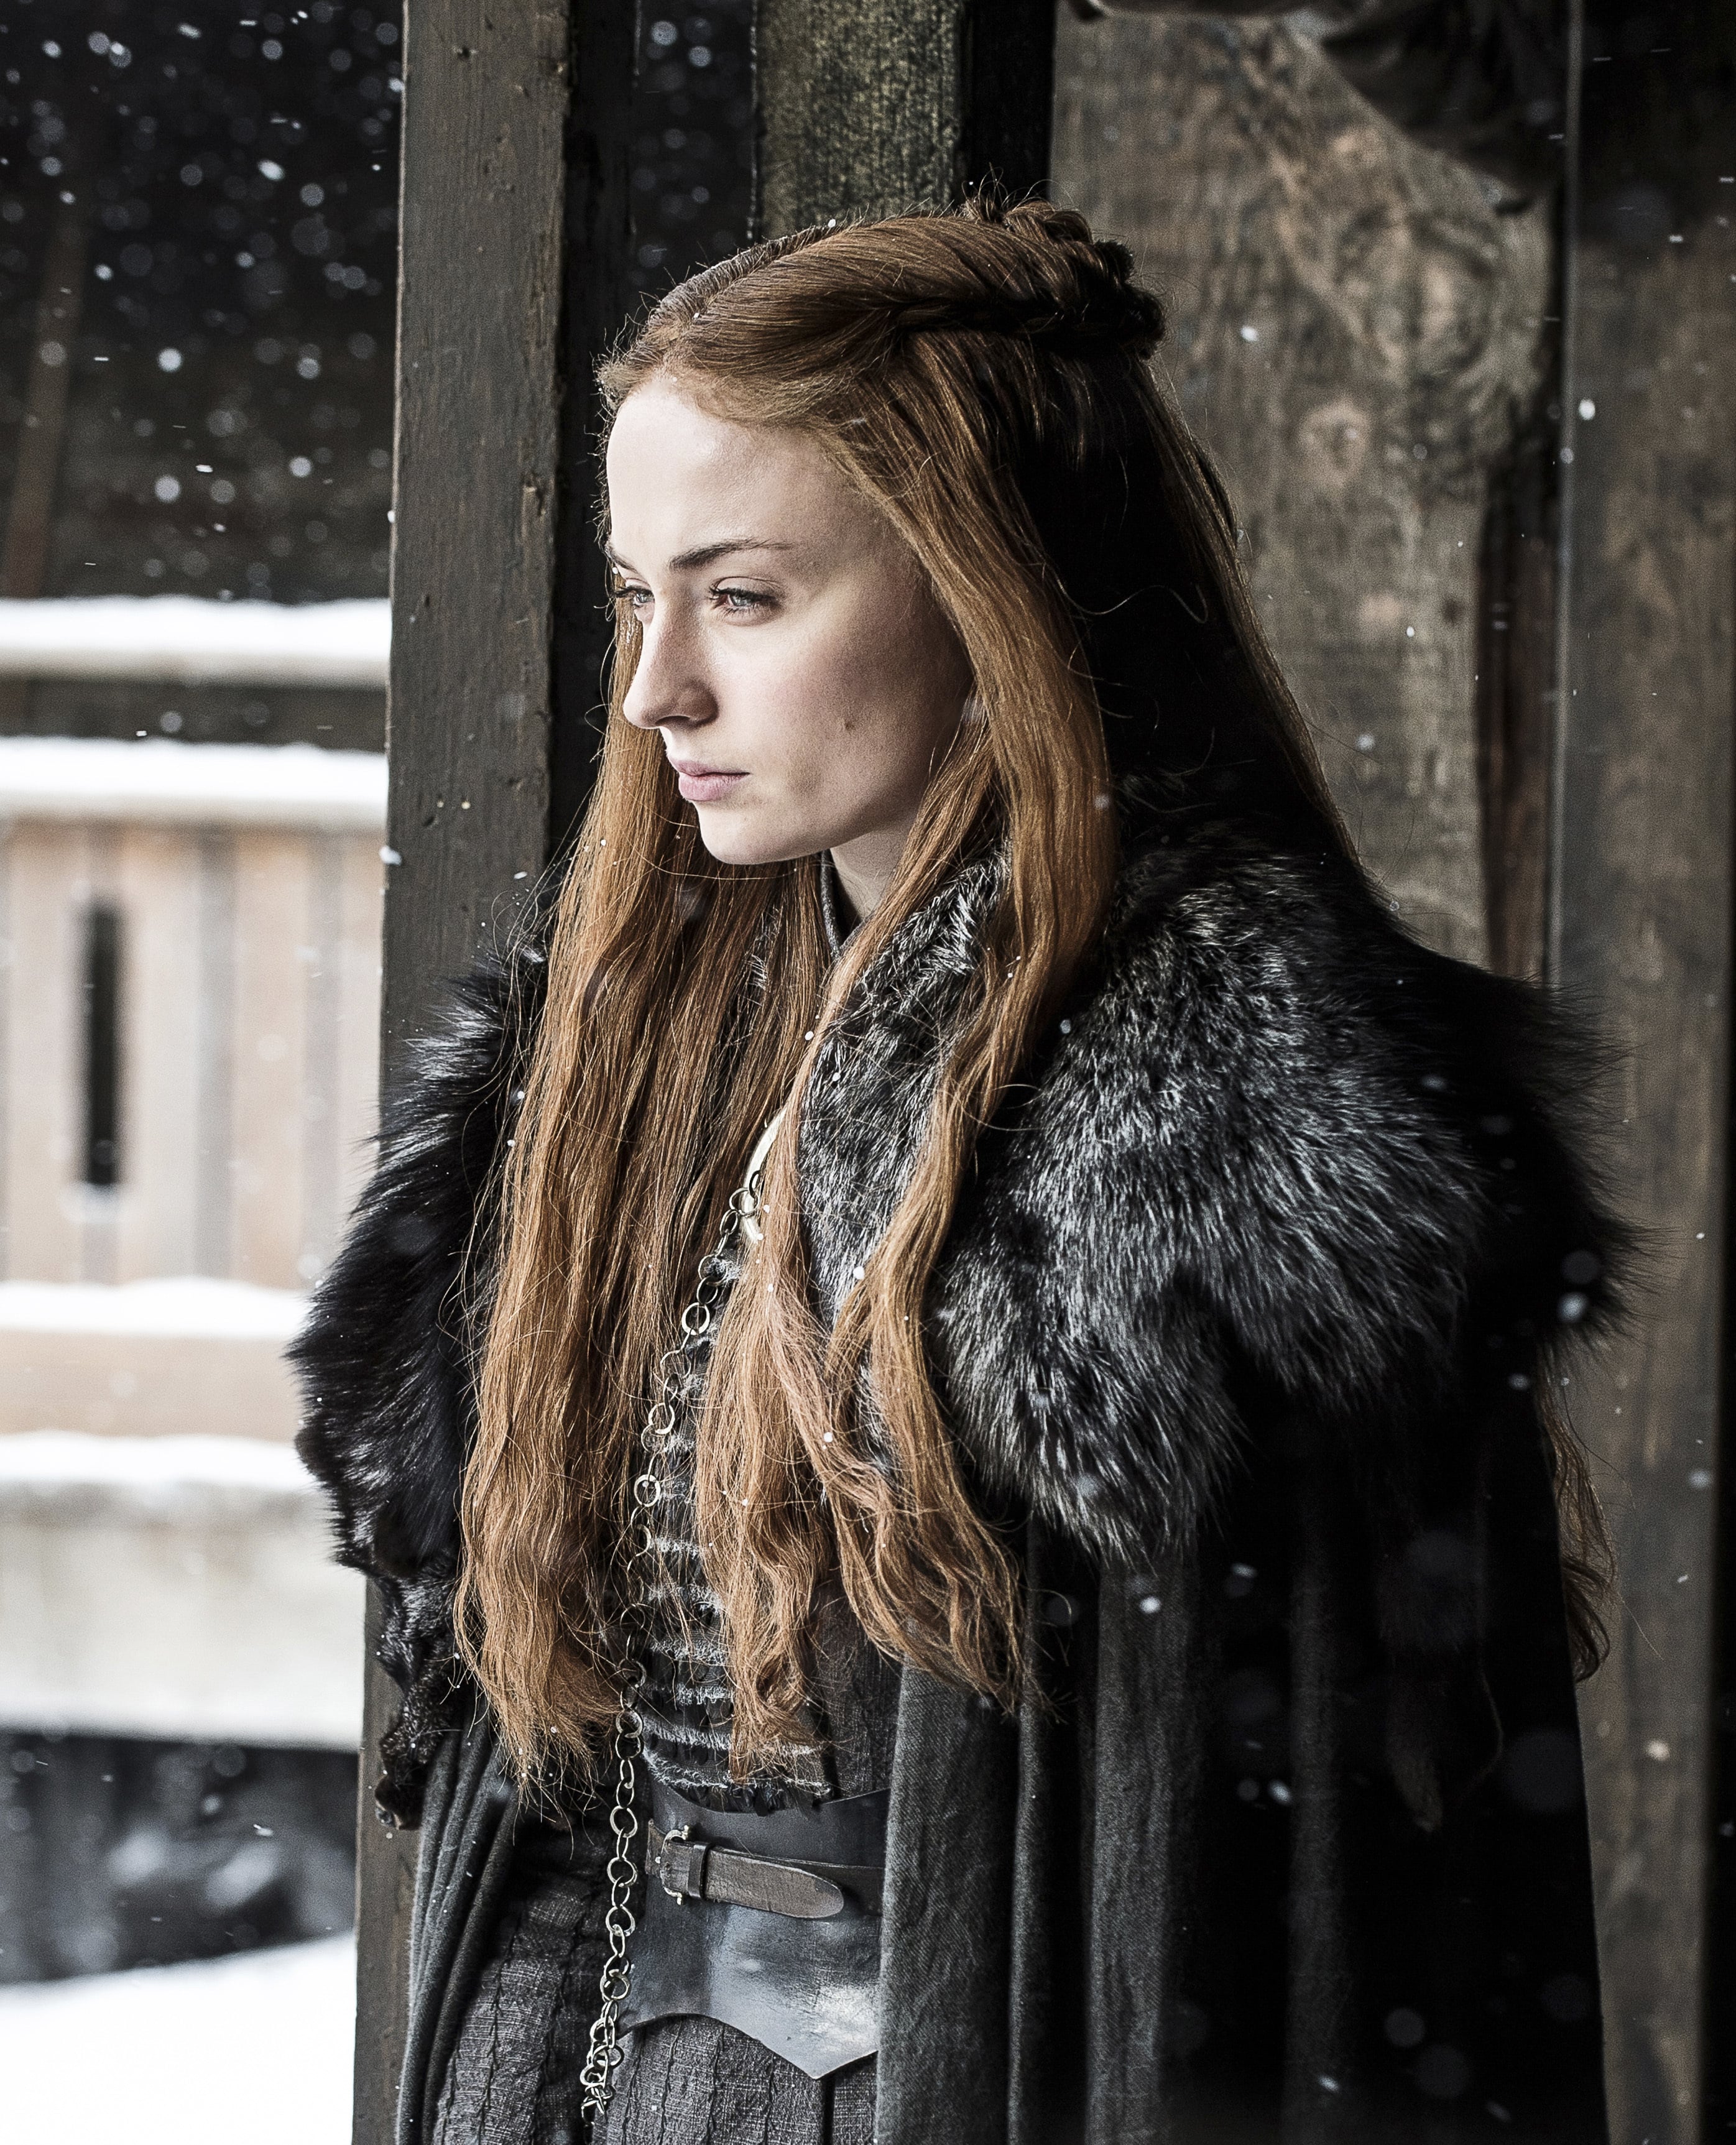 The 10 Best Game of Thrones Female Characters